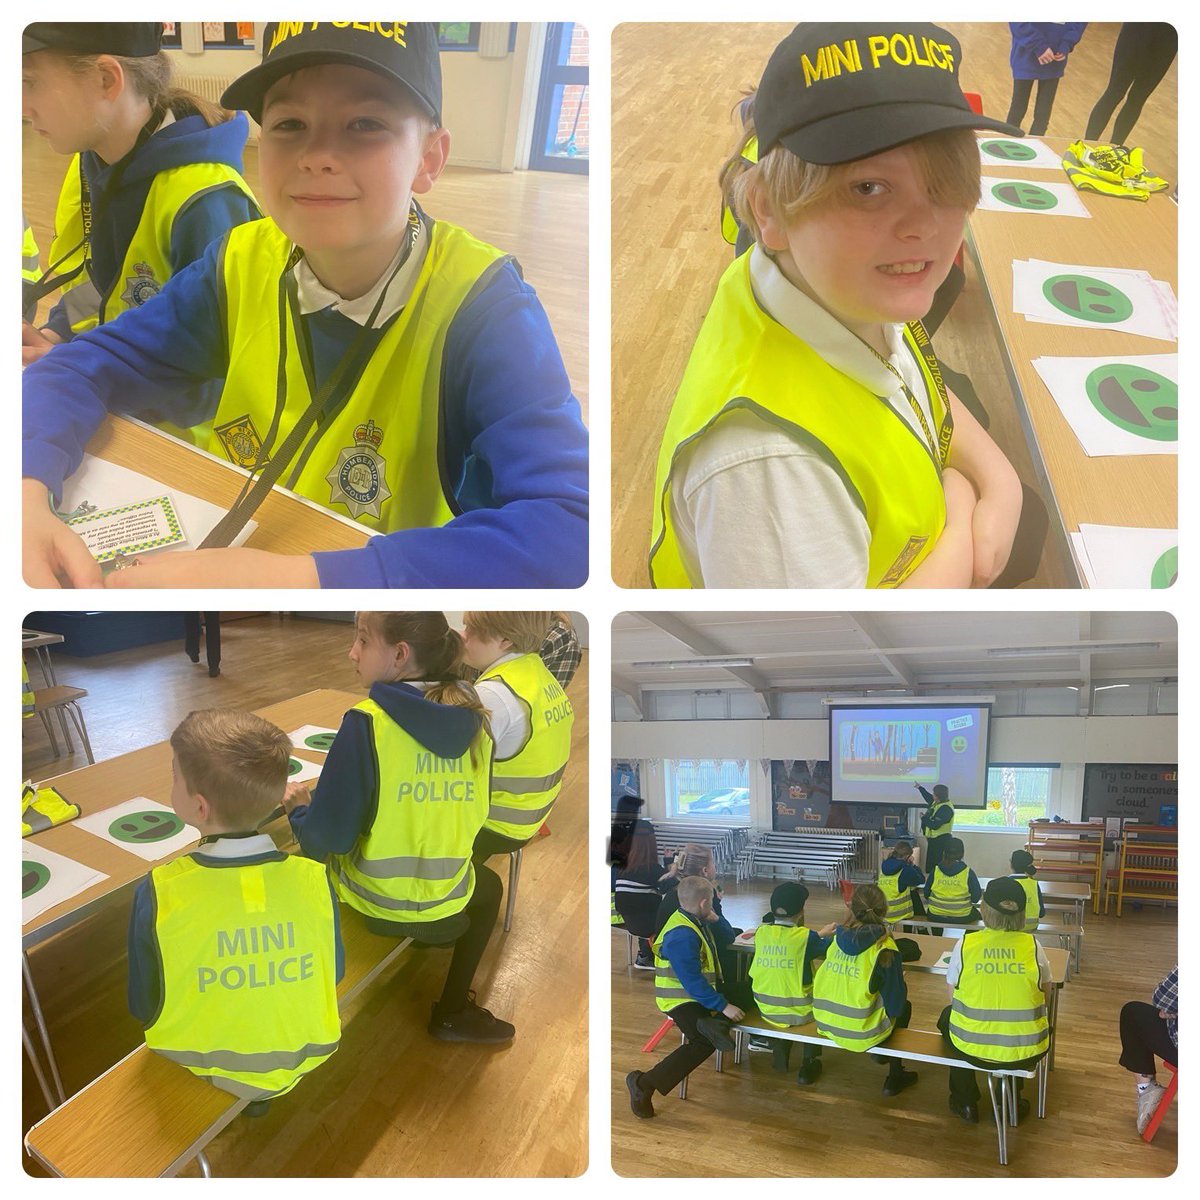 Meet our Mini Police recruits! The Mini Police is a 7 week programme covering lots of different ways to stay safe including online safety. We can’t wait to look at CSI and do some fingerprinting! #WestcottEnrichment @Humberbeat #KeepingSafe #MiniPolice